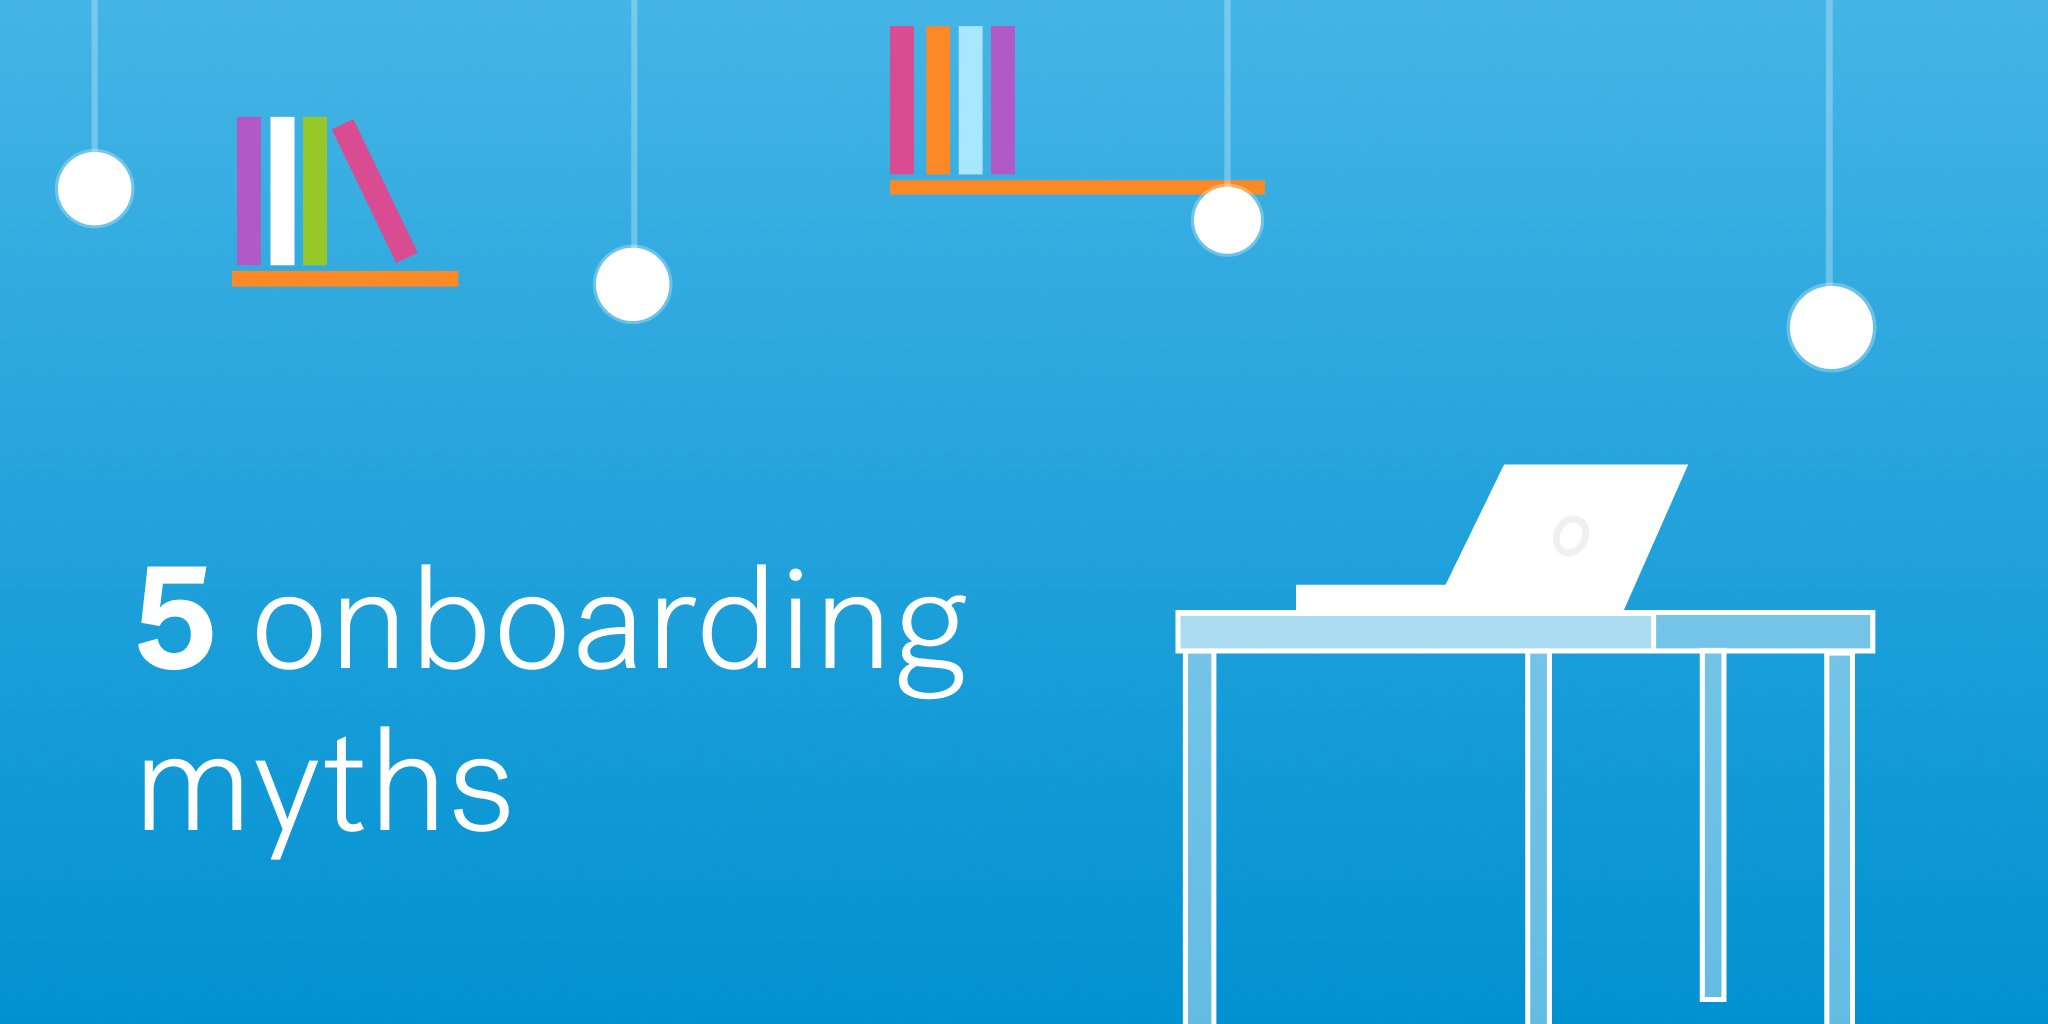 Graphic on a blue background of a desk with a laptop on it, books on shelves around the desk, entitled 5 onboarding myths. 4 circular lamps hang from the ceiling. 